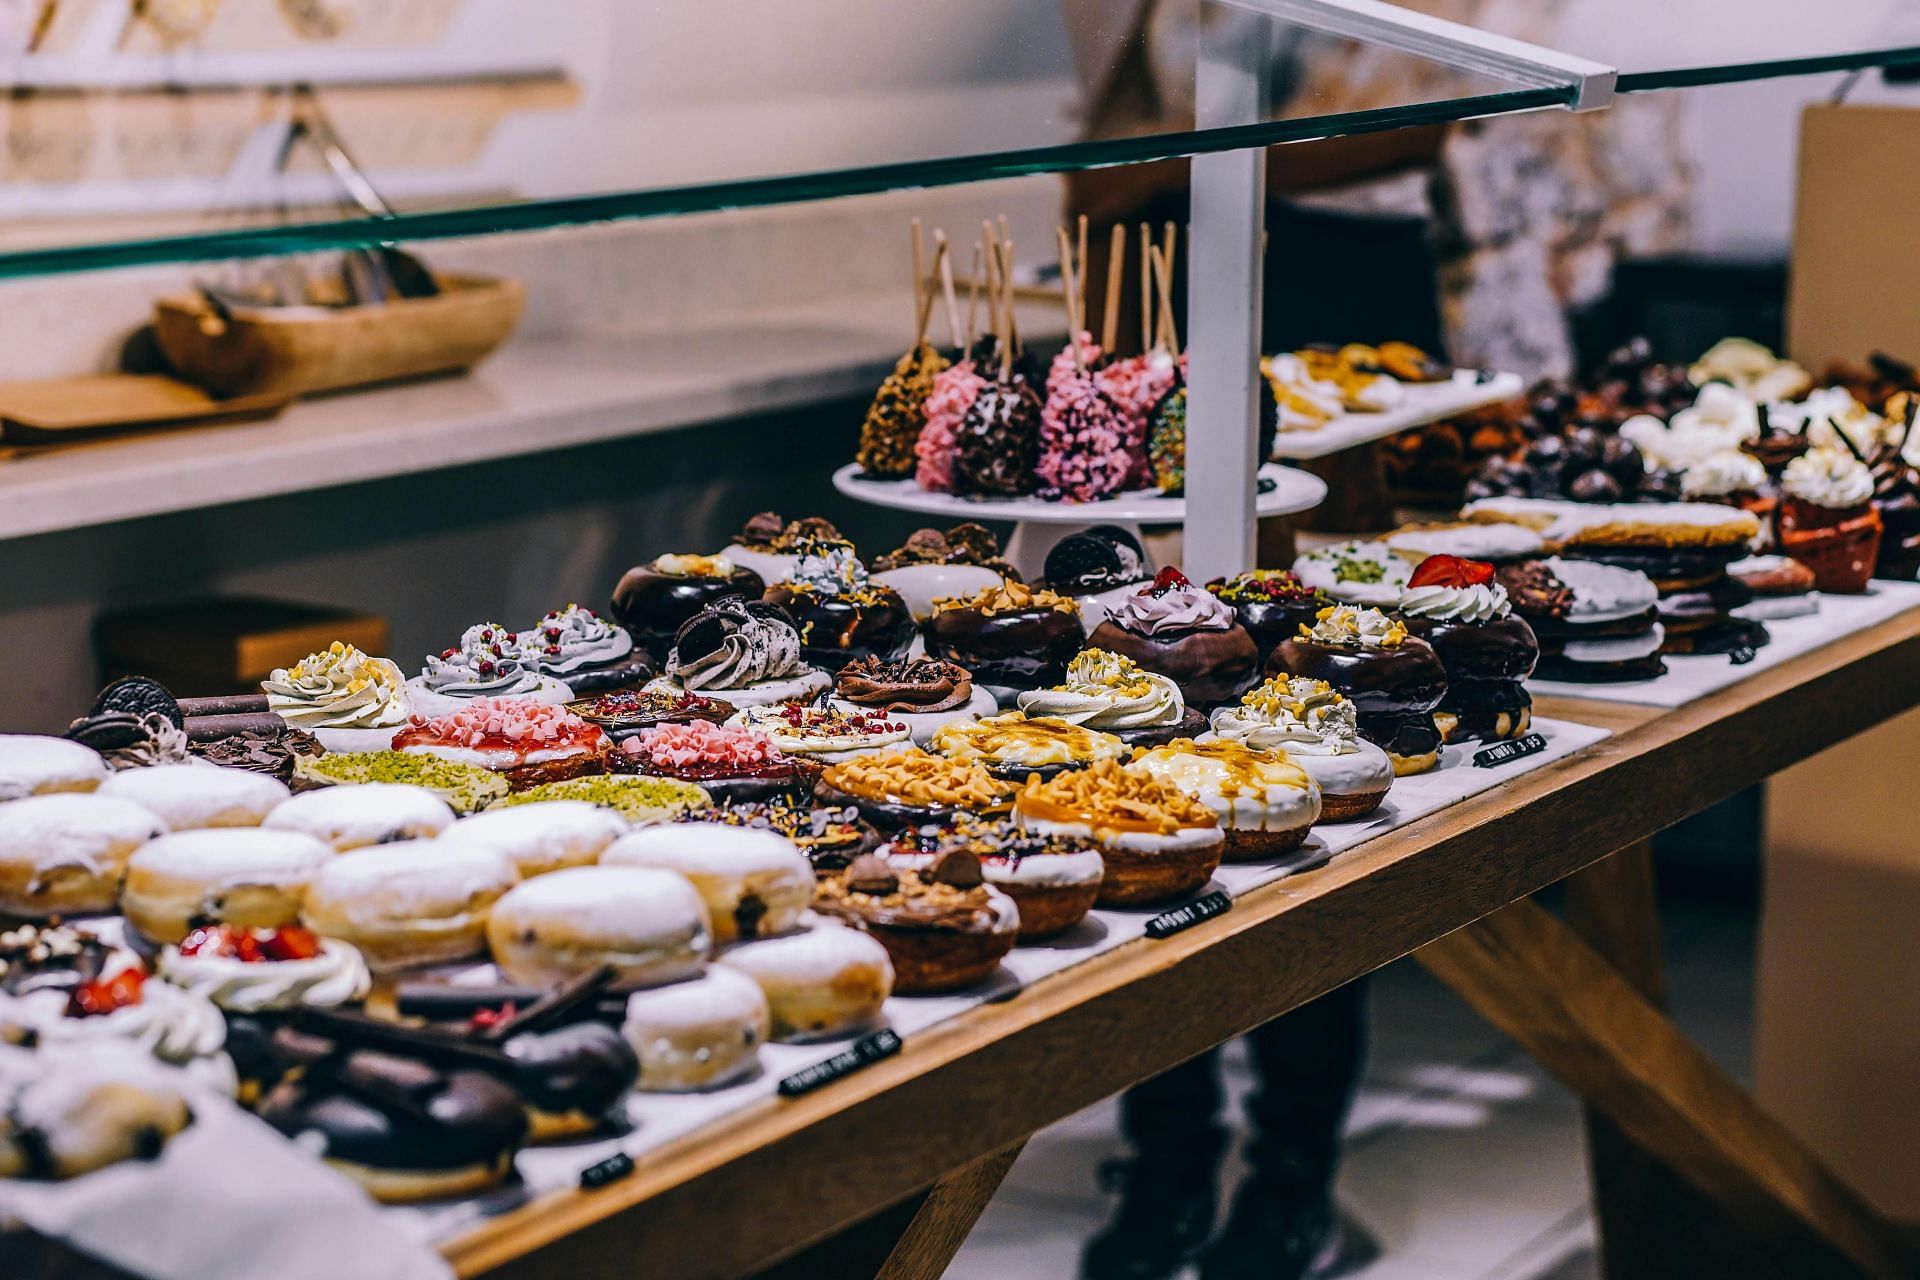 Tips to stop eating junk food (image sourced via Pexels / Photo by igor)